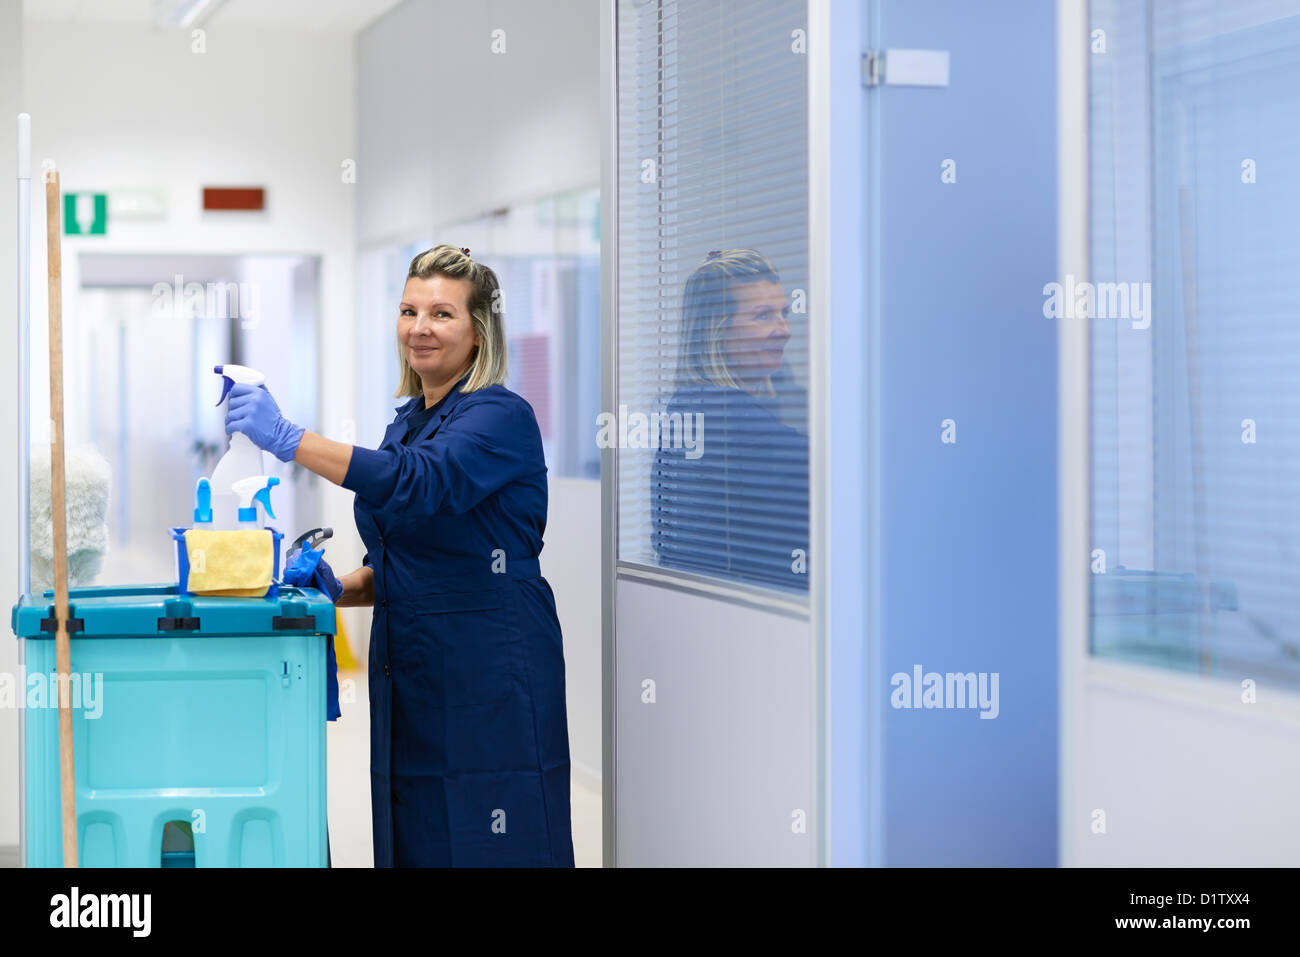 Women at work, portrait of happy professional female cleaner smiling and looking at camera in office. Three quarter length Stock Photo